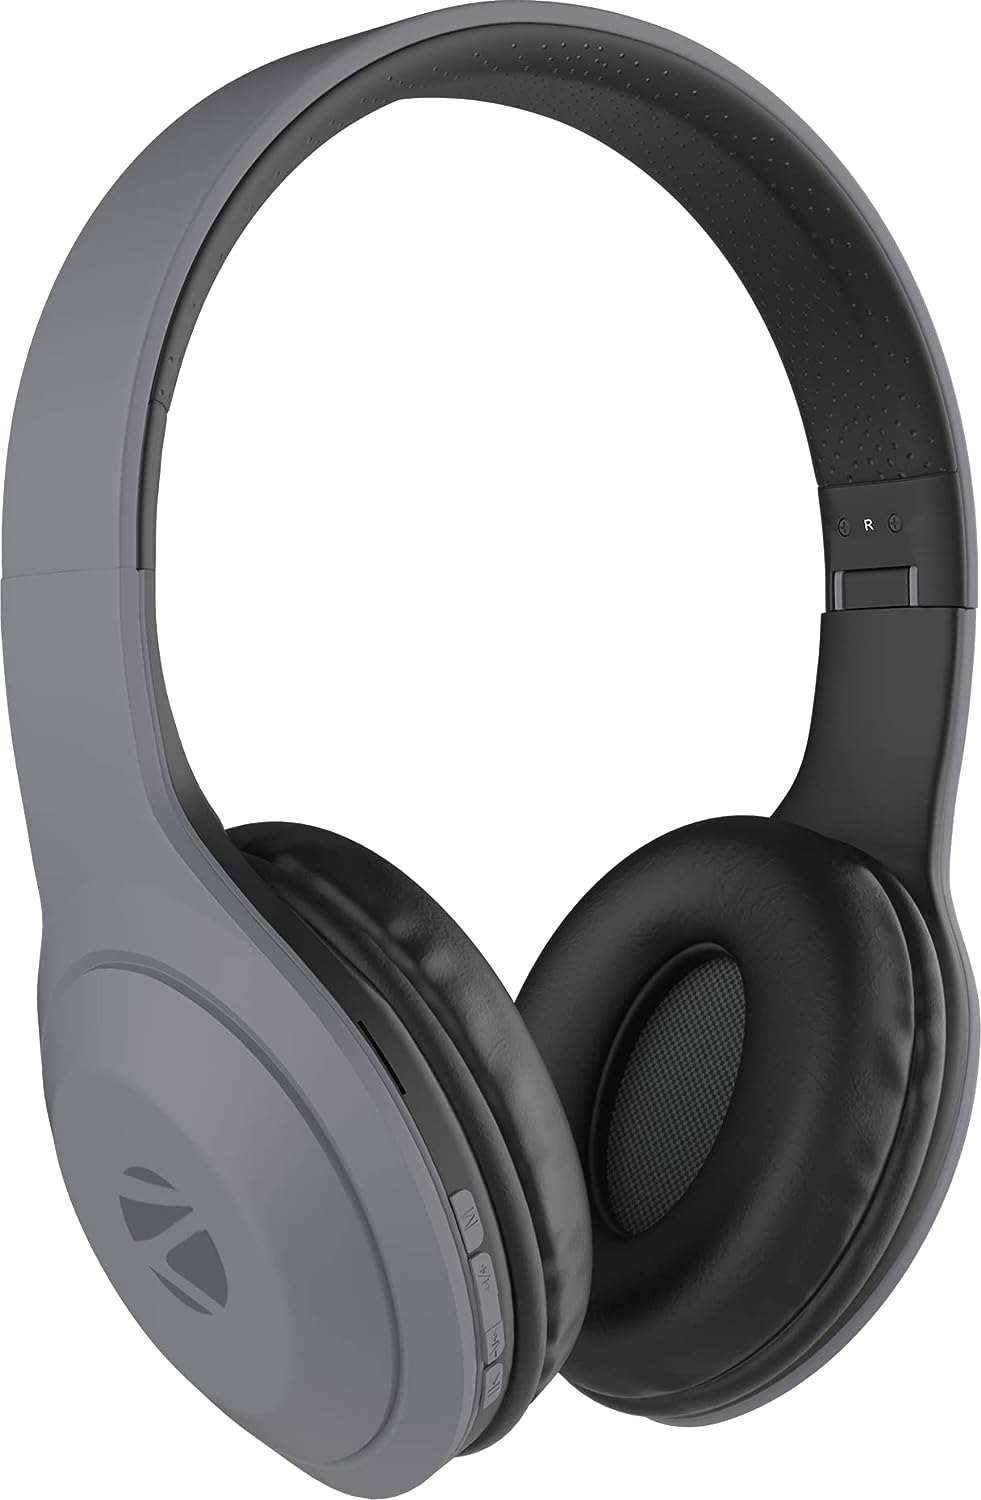 ZEBRONICS Zeb Duke 101 (Grey) Wireless Headphone with Mic, Supporting Bluetooth 5.0, AUX Input Wired Mode, mSD Card Slot, Dual Pairing, On Ear & FM,12 hrs Play Back time, Media/Call Controls